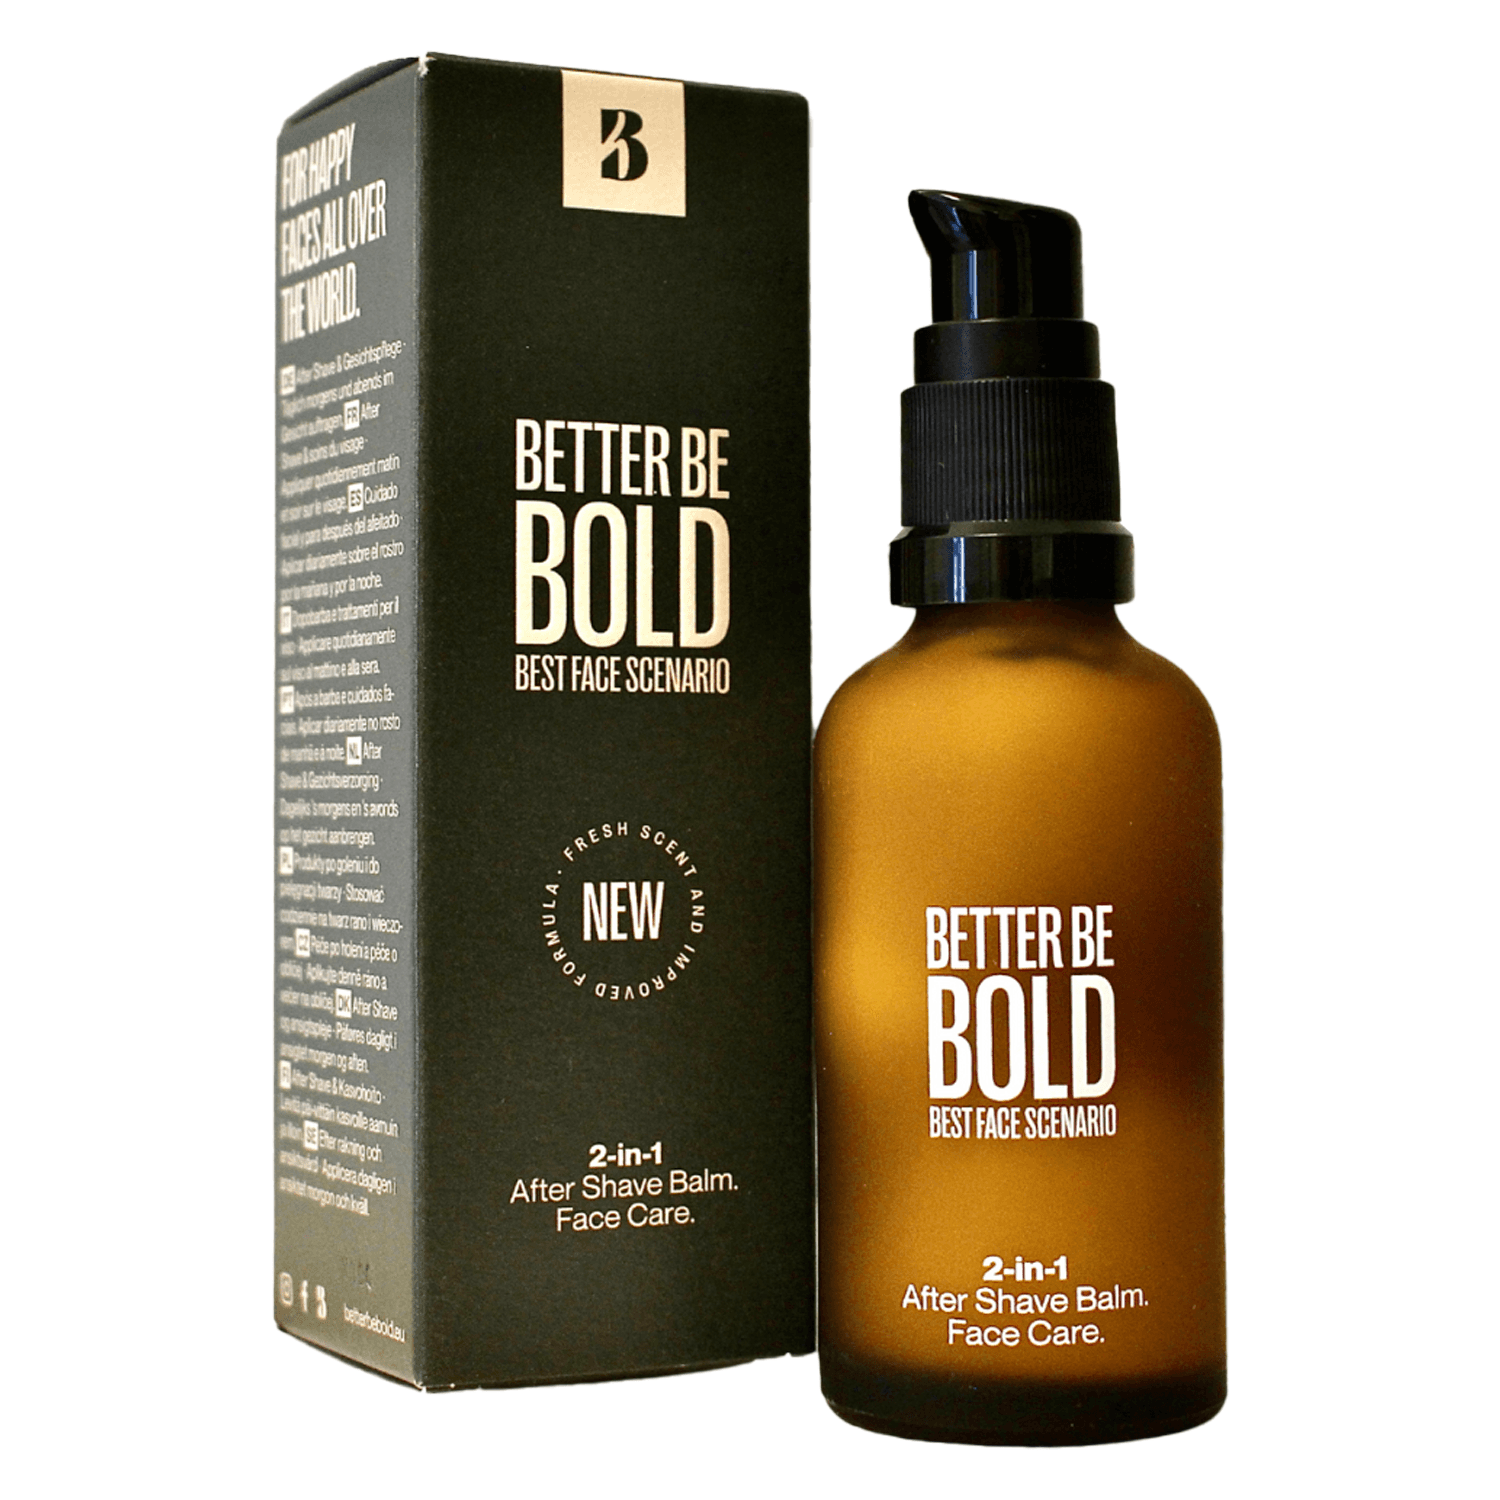 BETTER BE BOLD - 2-in-1 After Shave Balm & Gesichtscreme